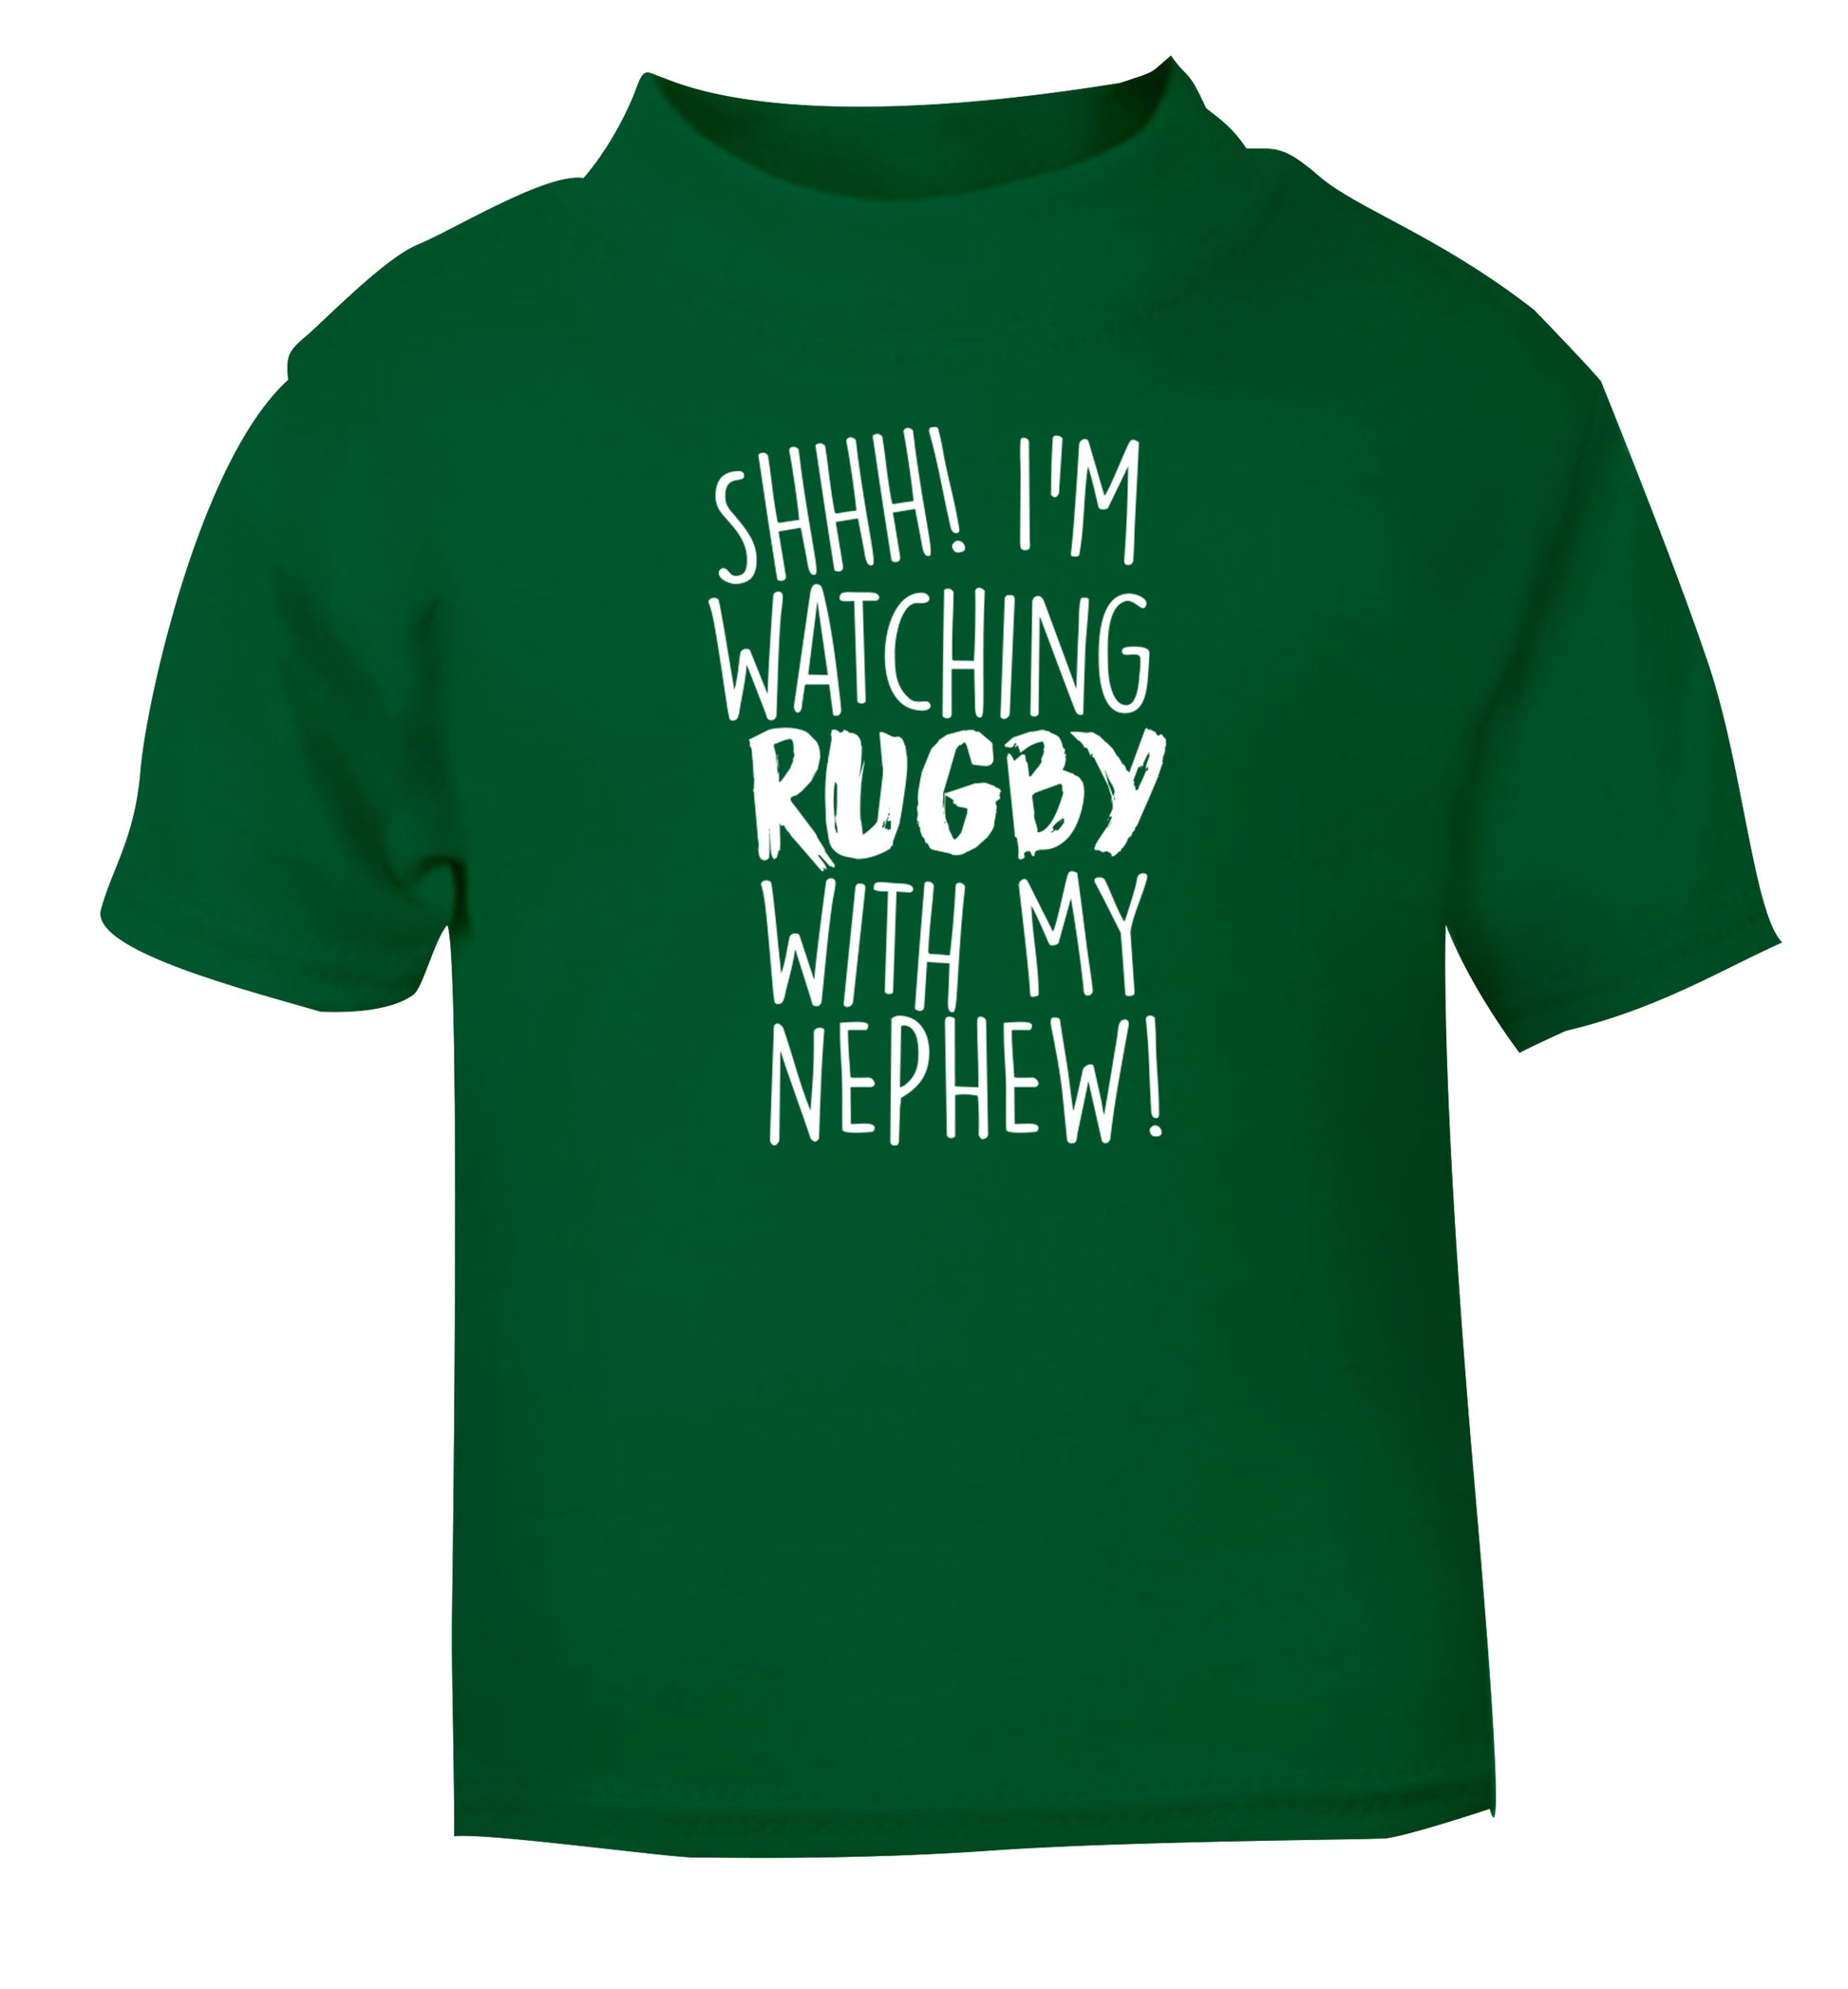 Shh.. I'm watching rugby with my nephew green Baby Toddler Tshirt 2 Years